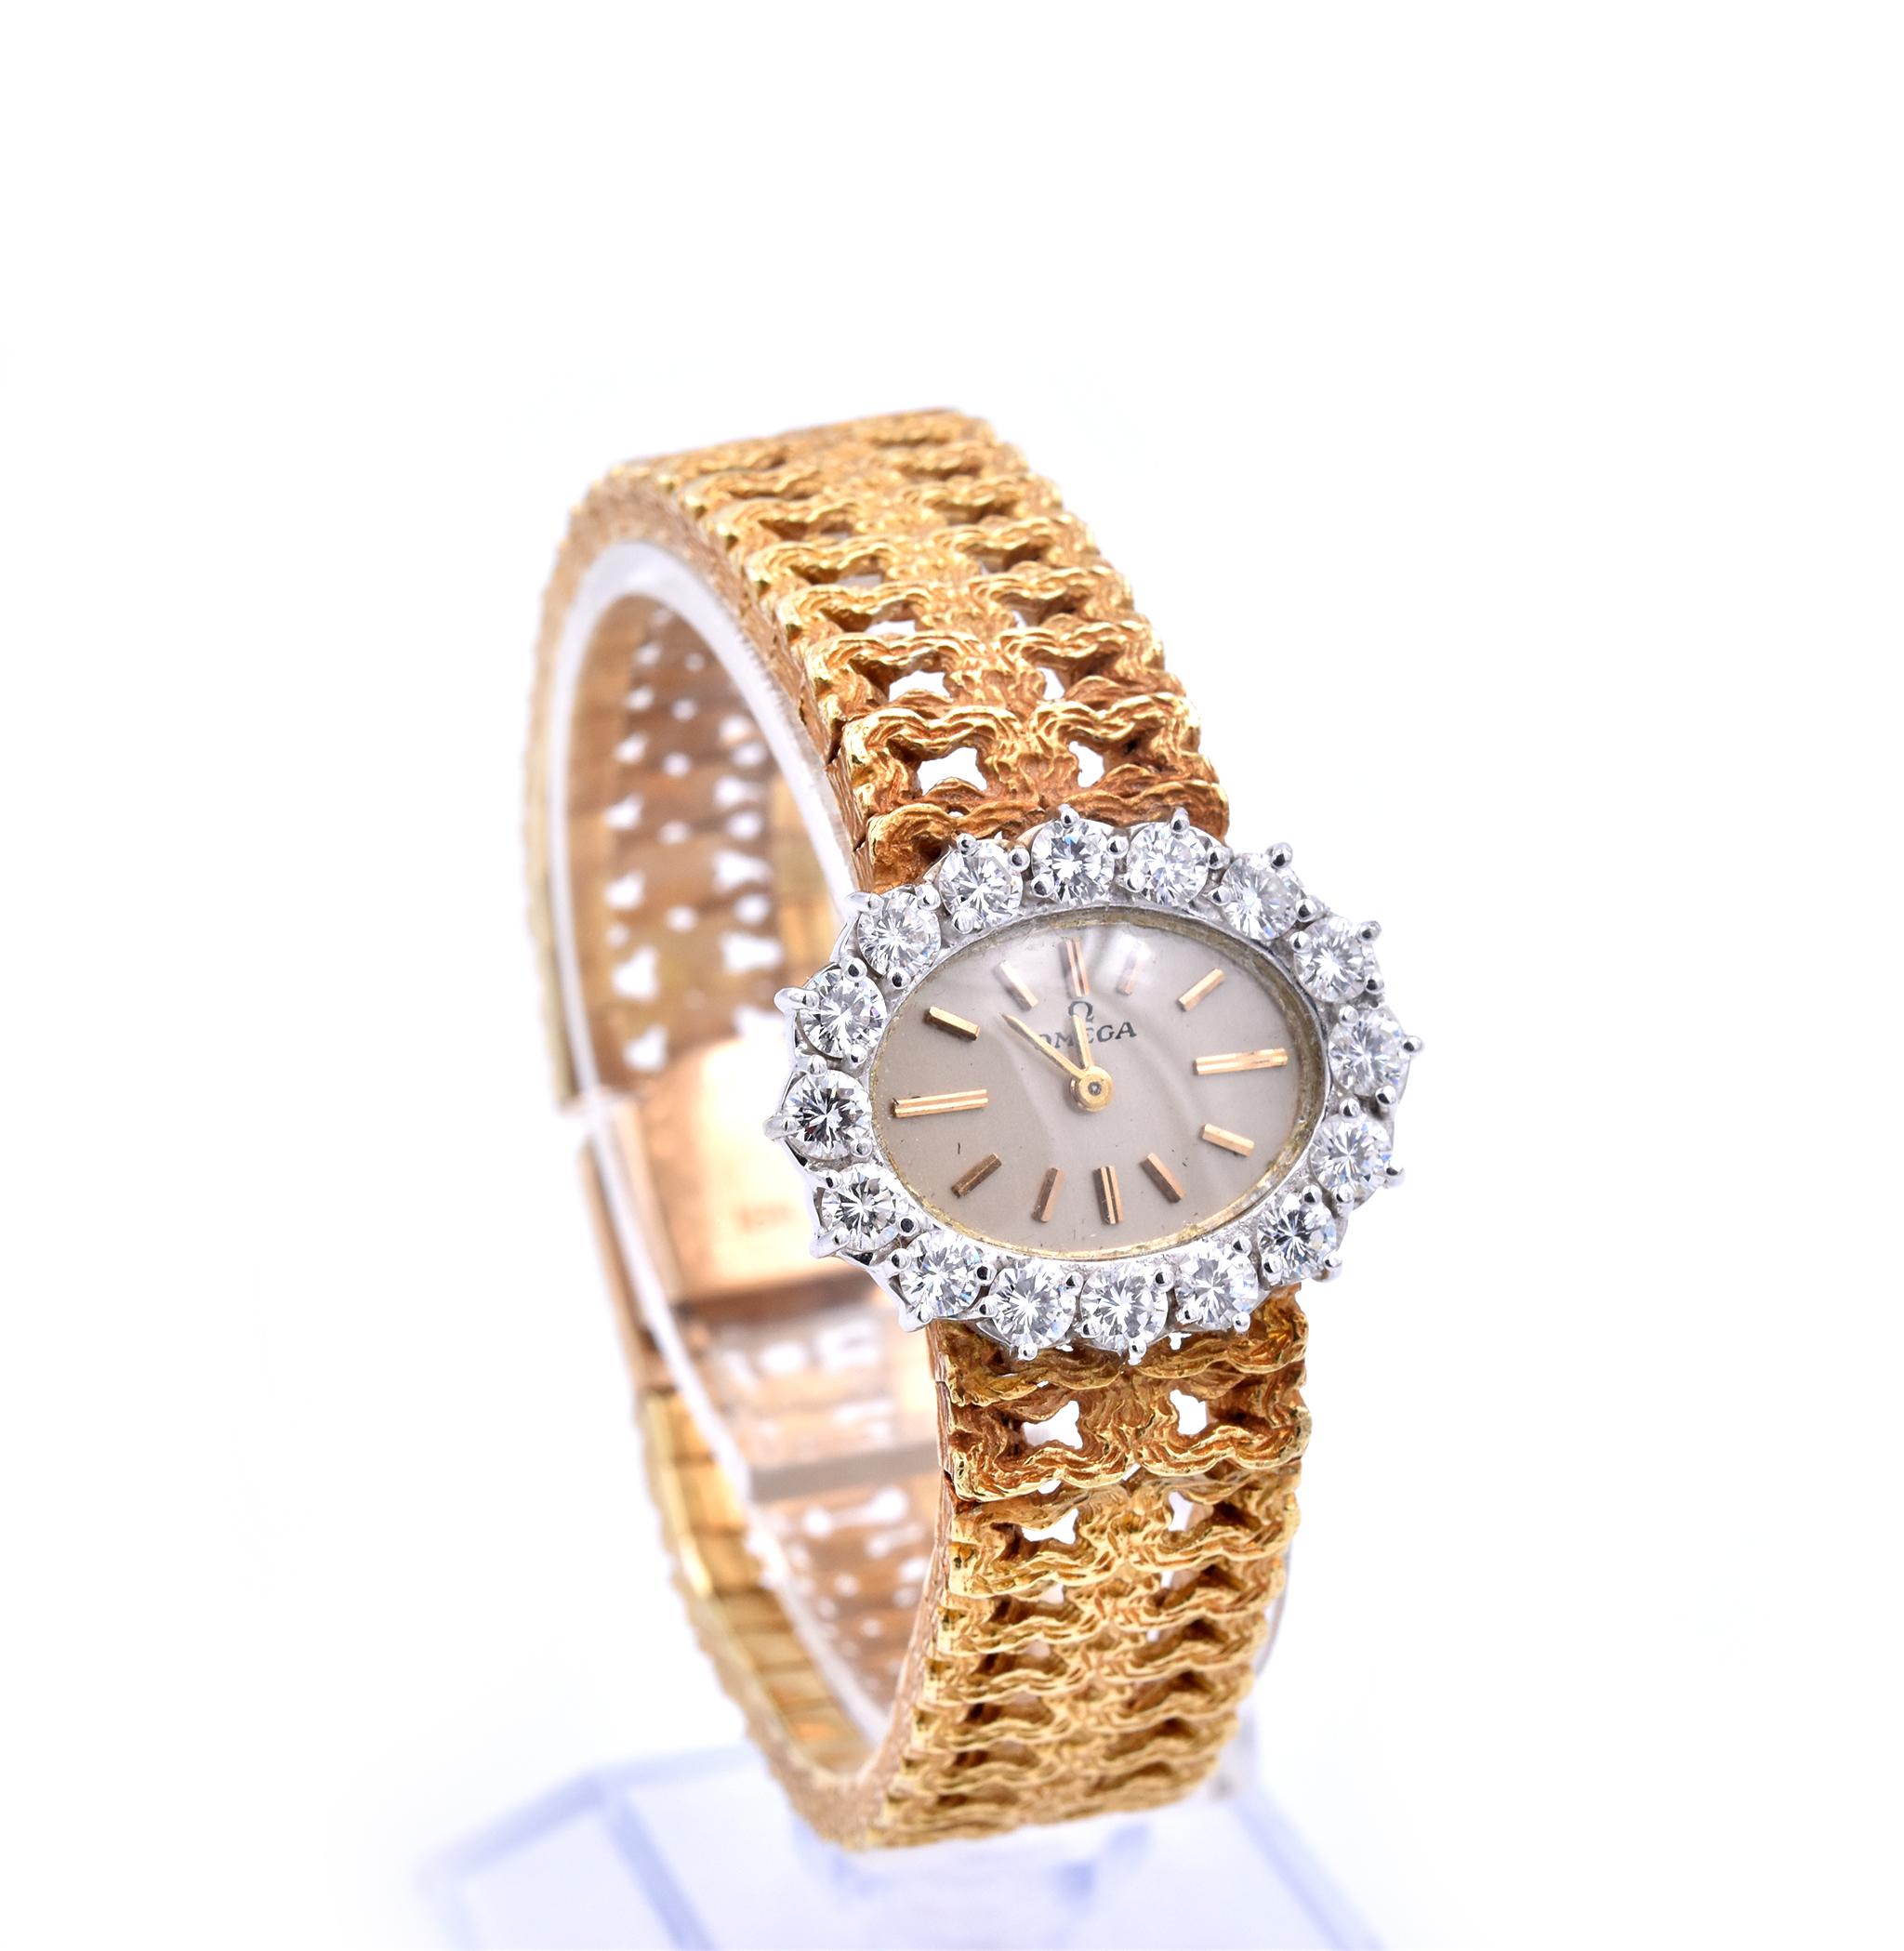 Movement: manual wind 
Function: hours, minutes
Case: 25.5mm x 21mm oval case
Bezel: 16 round brilliant cuts = 2.00cttw
Band: 14.50mm wide 18k yellow gold textured band
Dial: champagne dial with gold stick hour markers, gold hands
Weight: 57.99